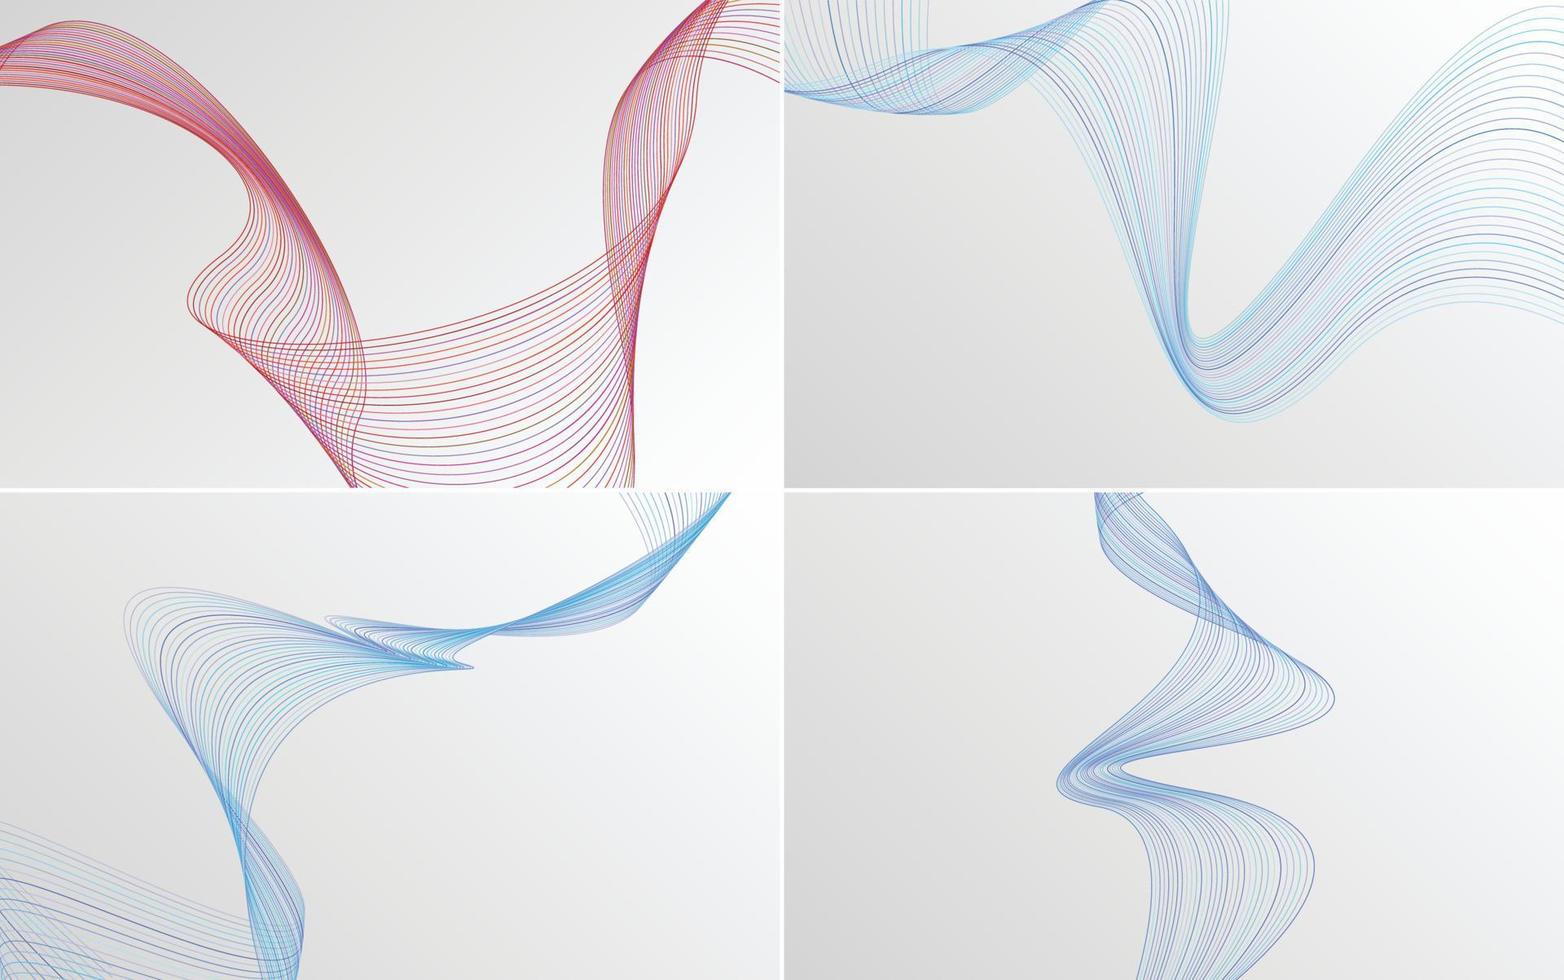 Elevate your project with this pack of 4 vector wave backgrounds